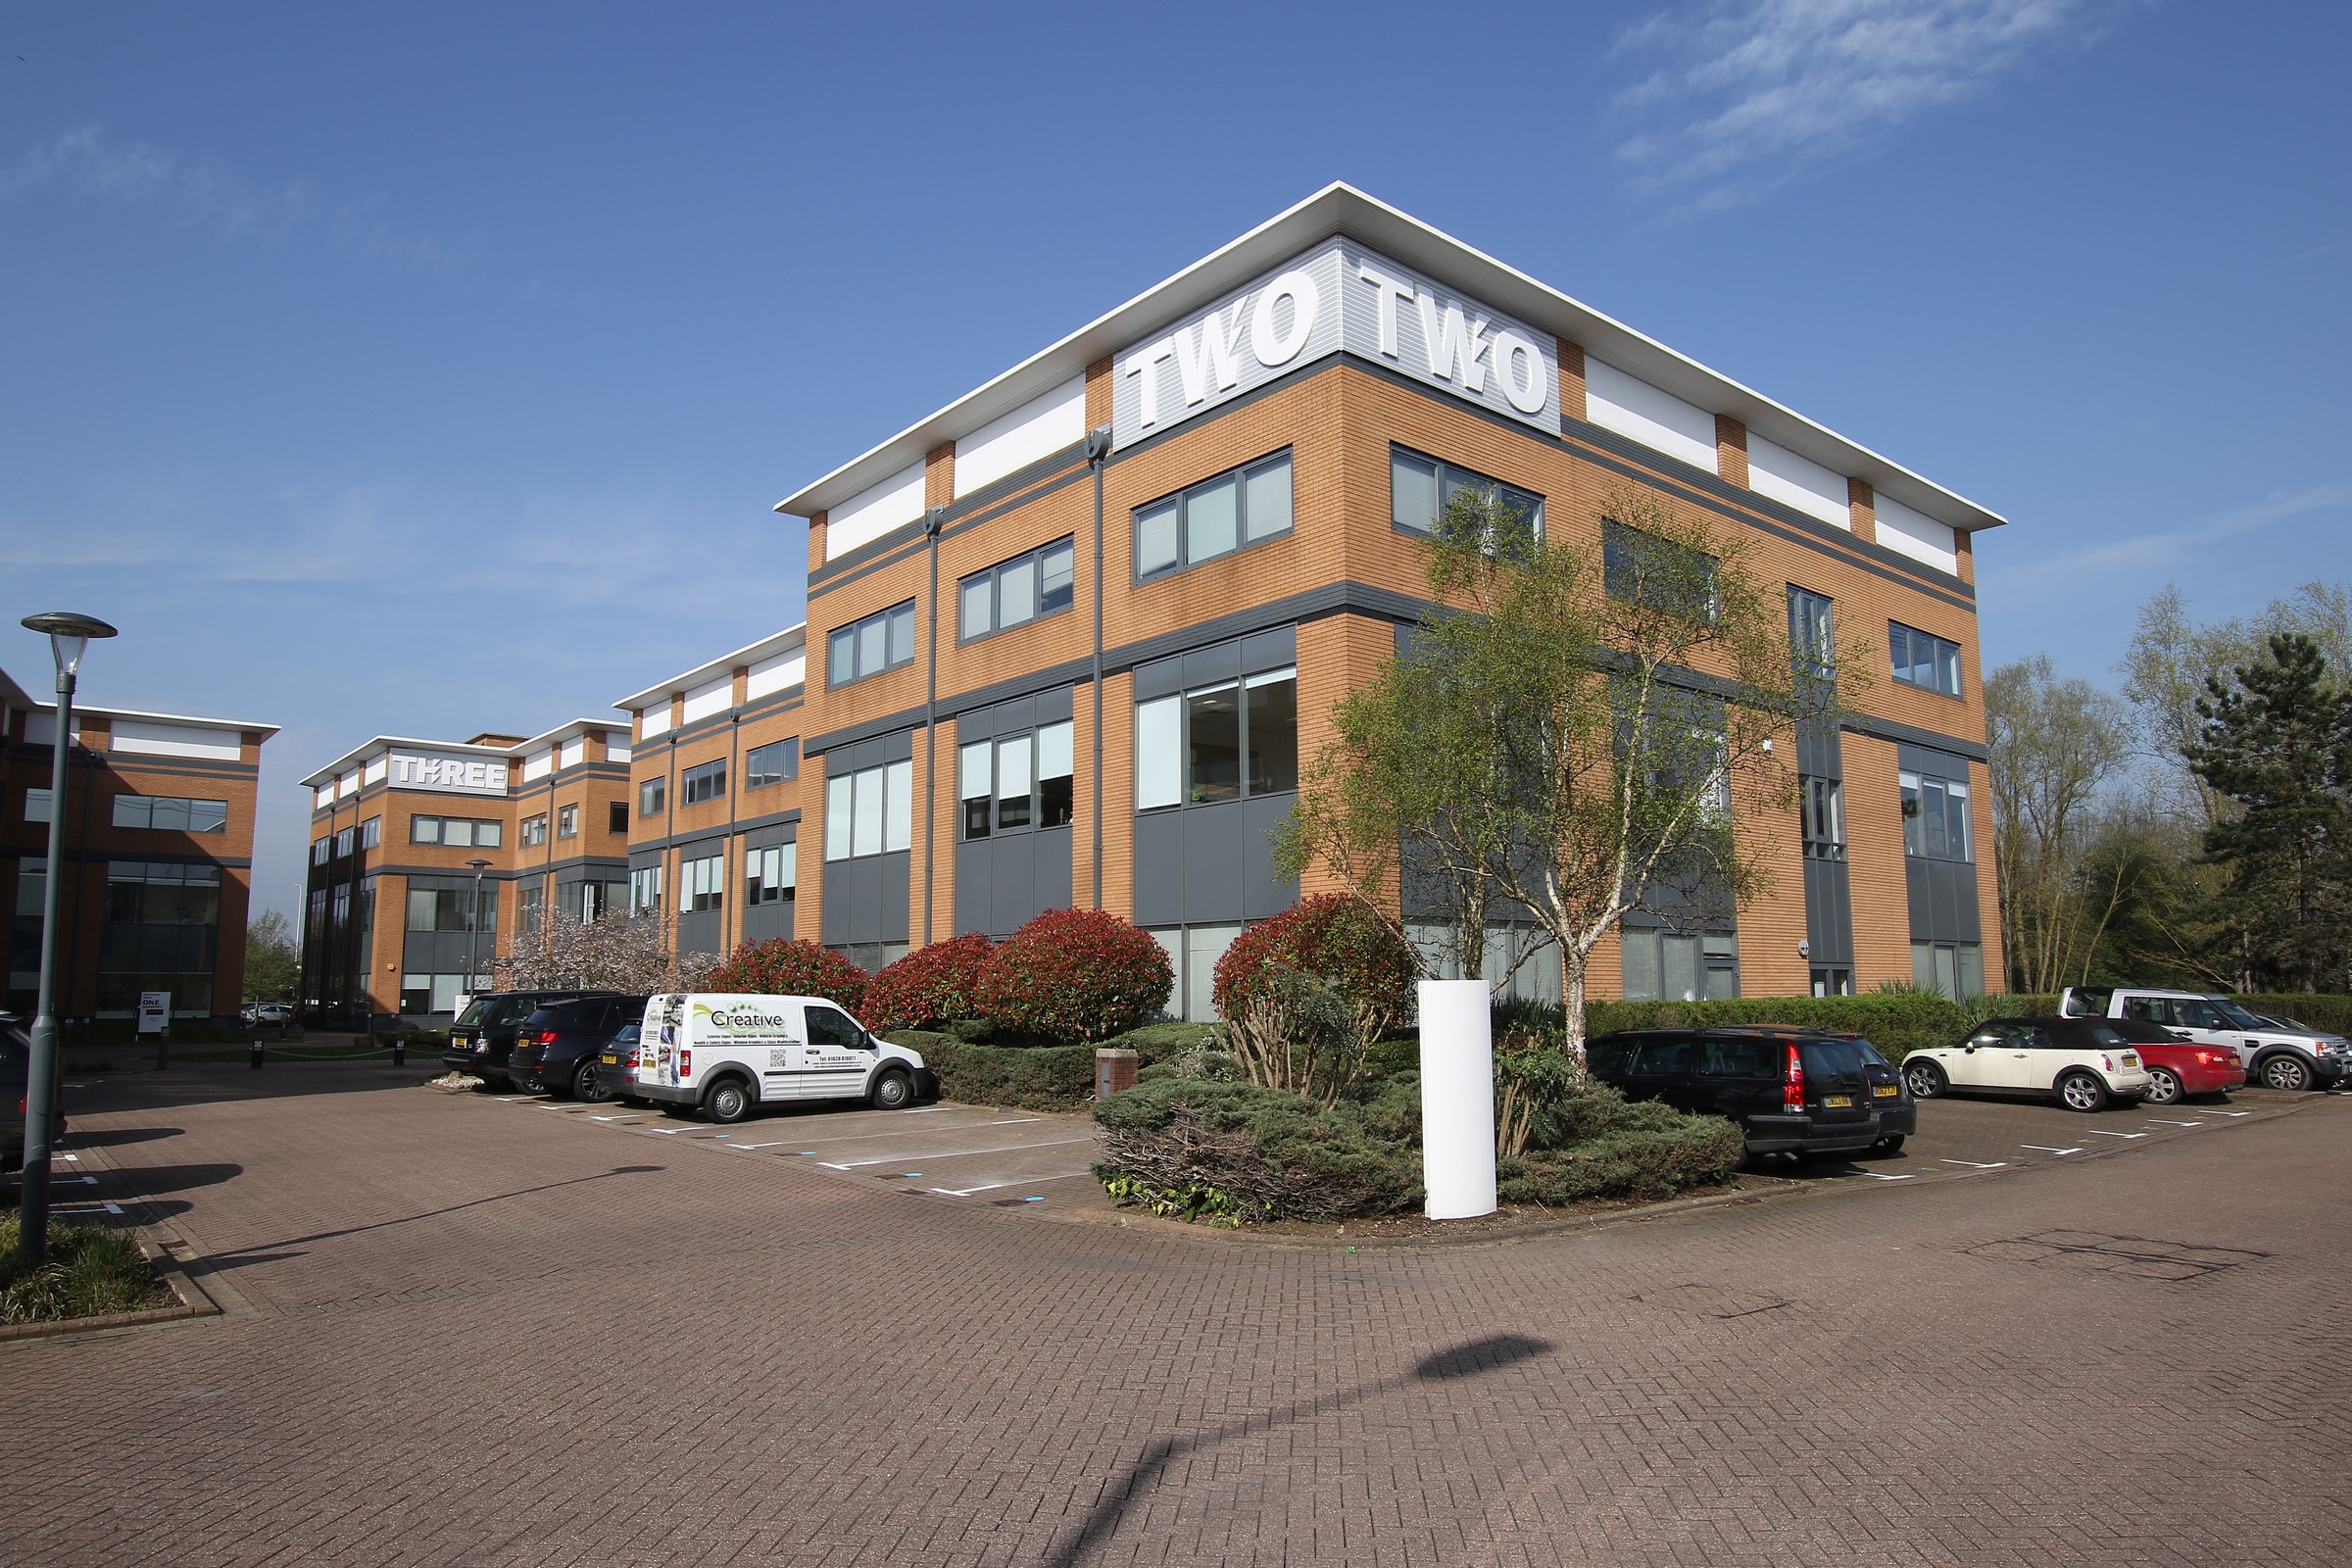 Three new lettings secured at Waterside Drive, Theale totalling 22,301 sq ft